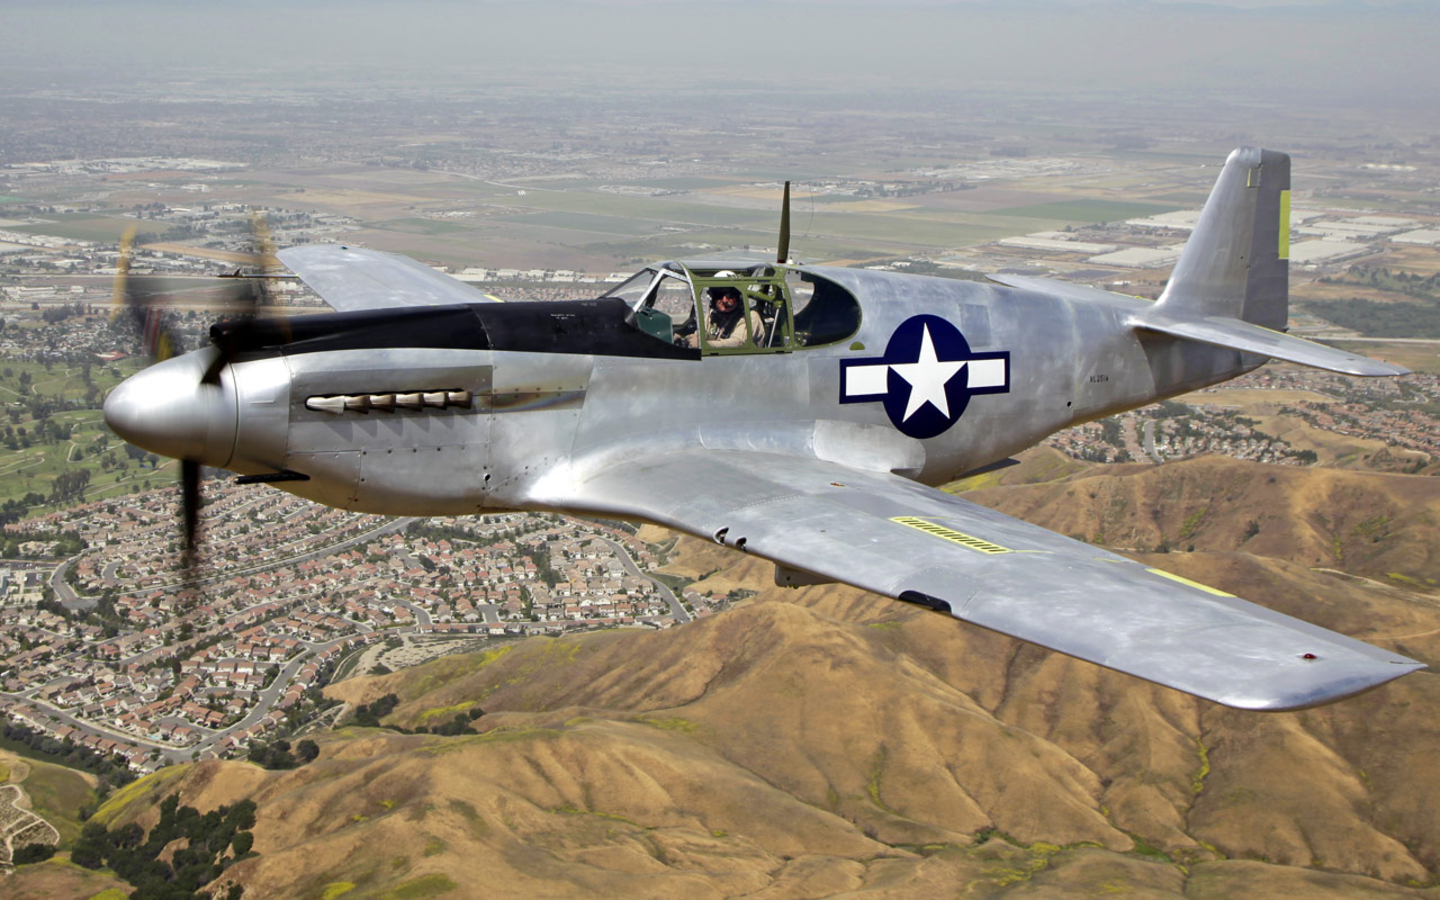 A restored North American A-36A Mustang aircraft in flight, post-war; note 'chin' guns and closed dive brakes